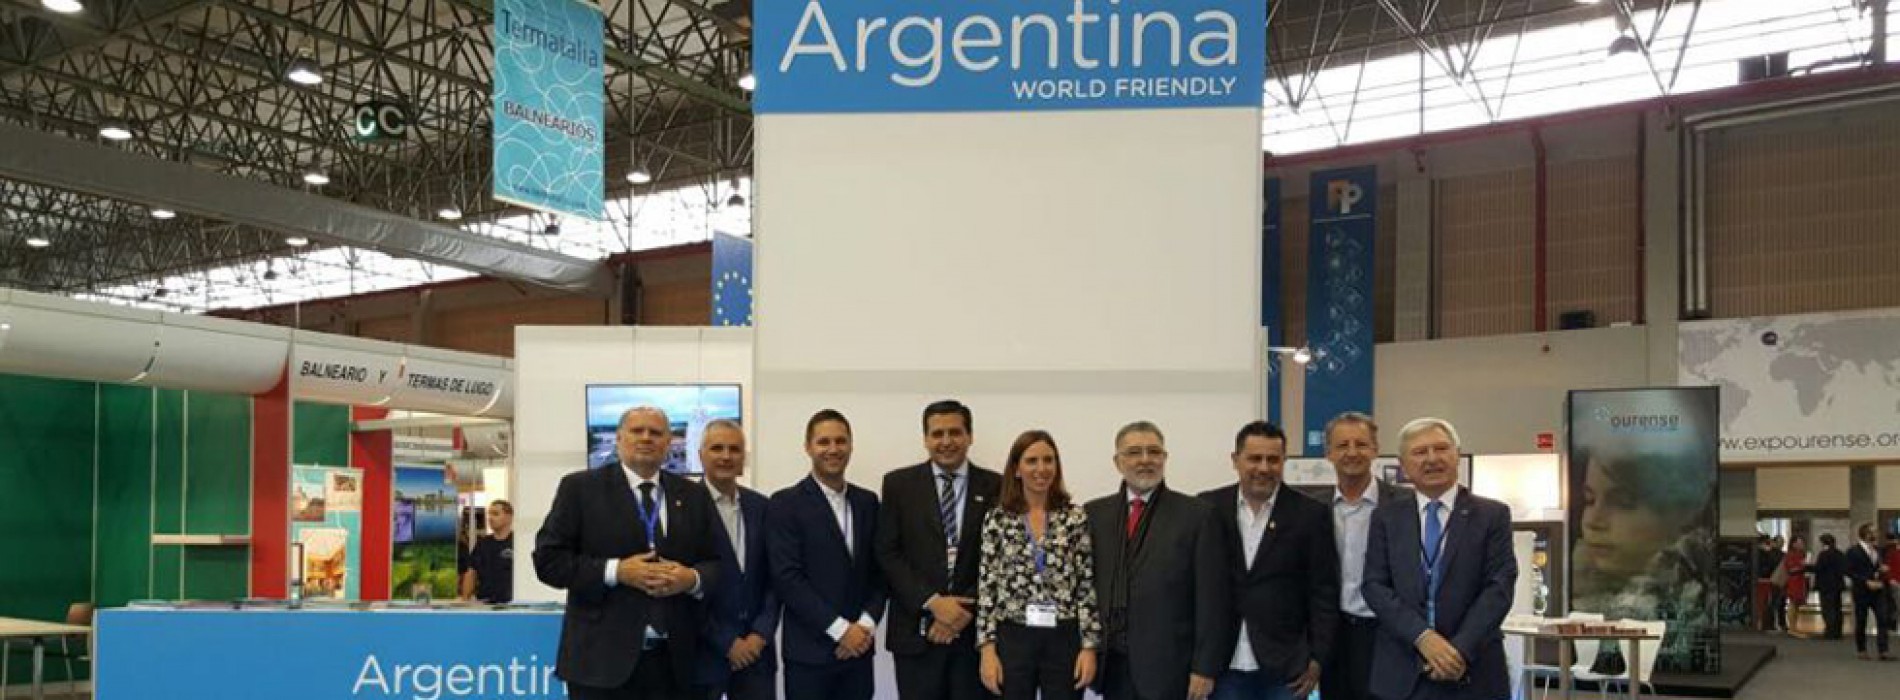 Outstanding presence of Argentina in 2017 Termatalia